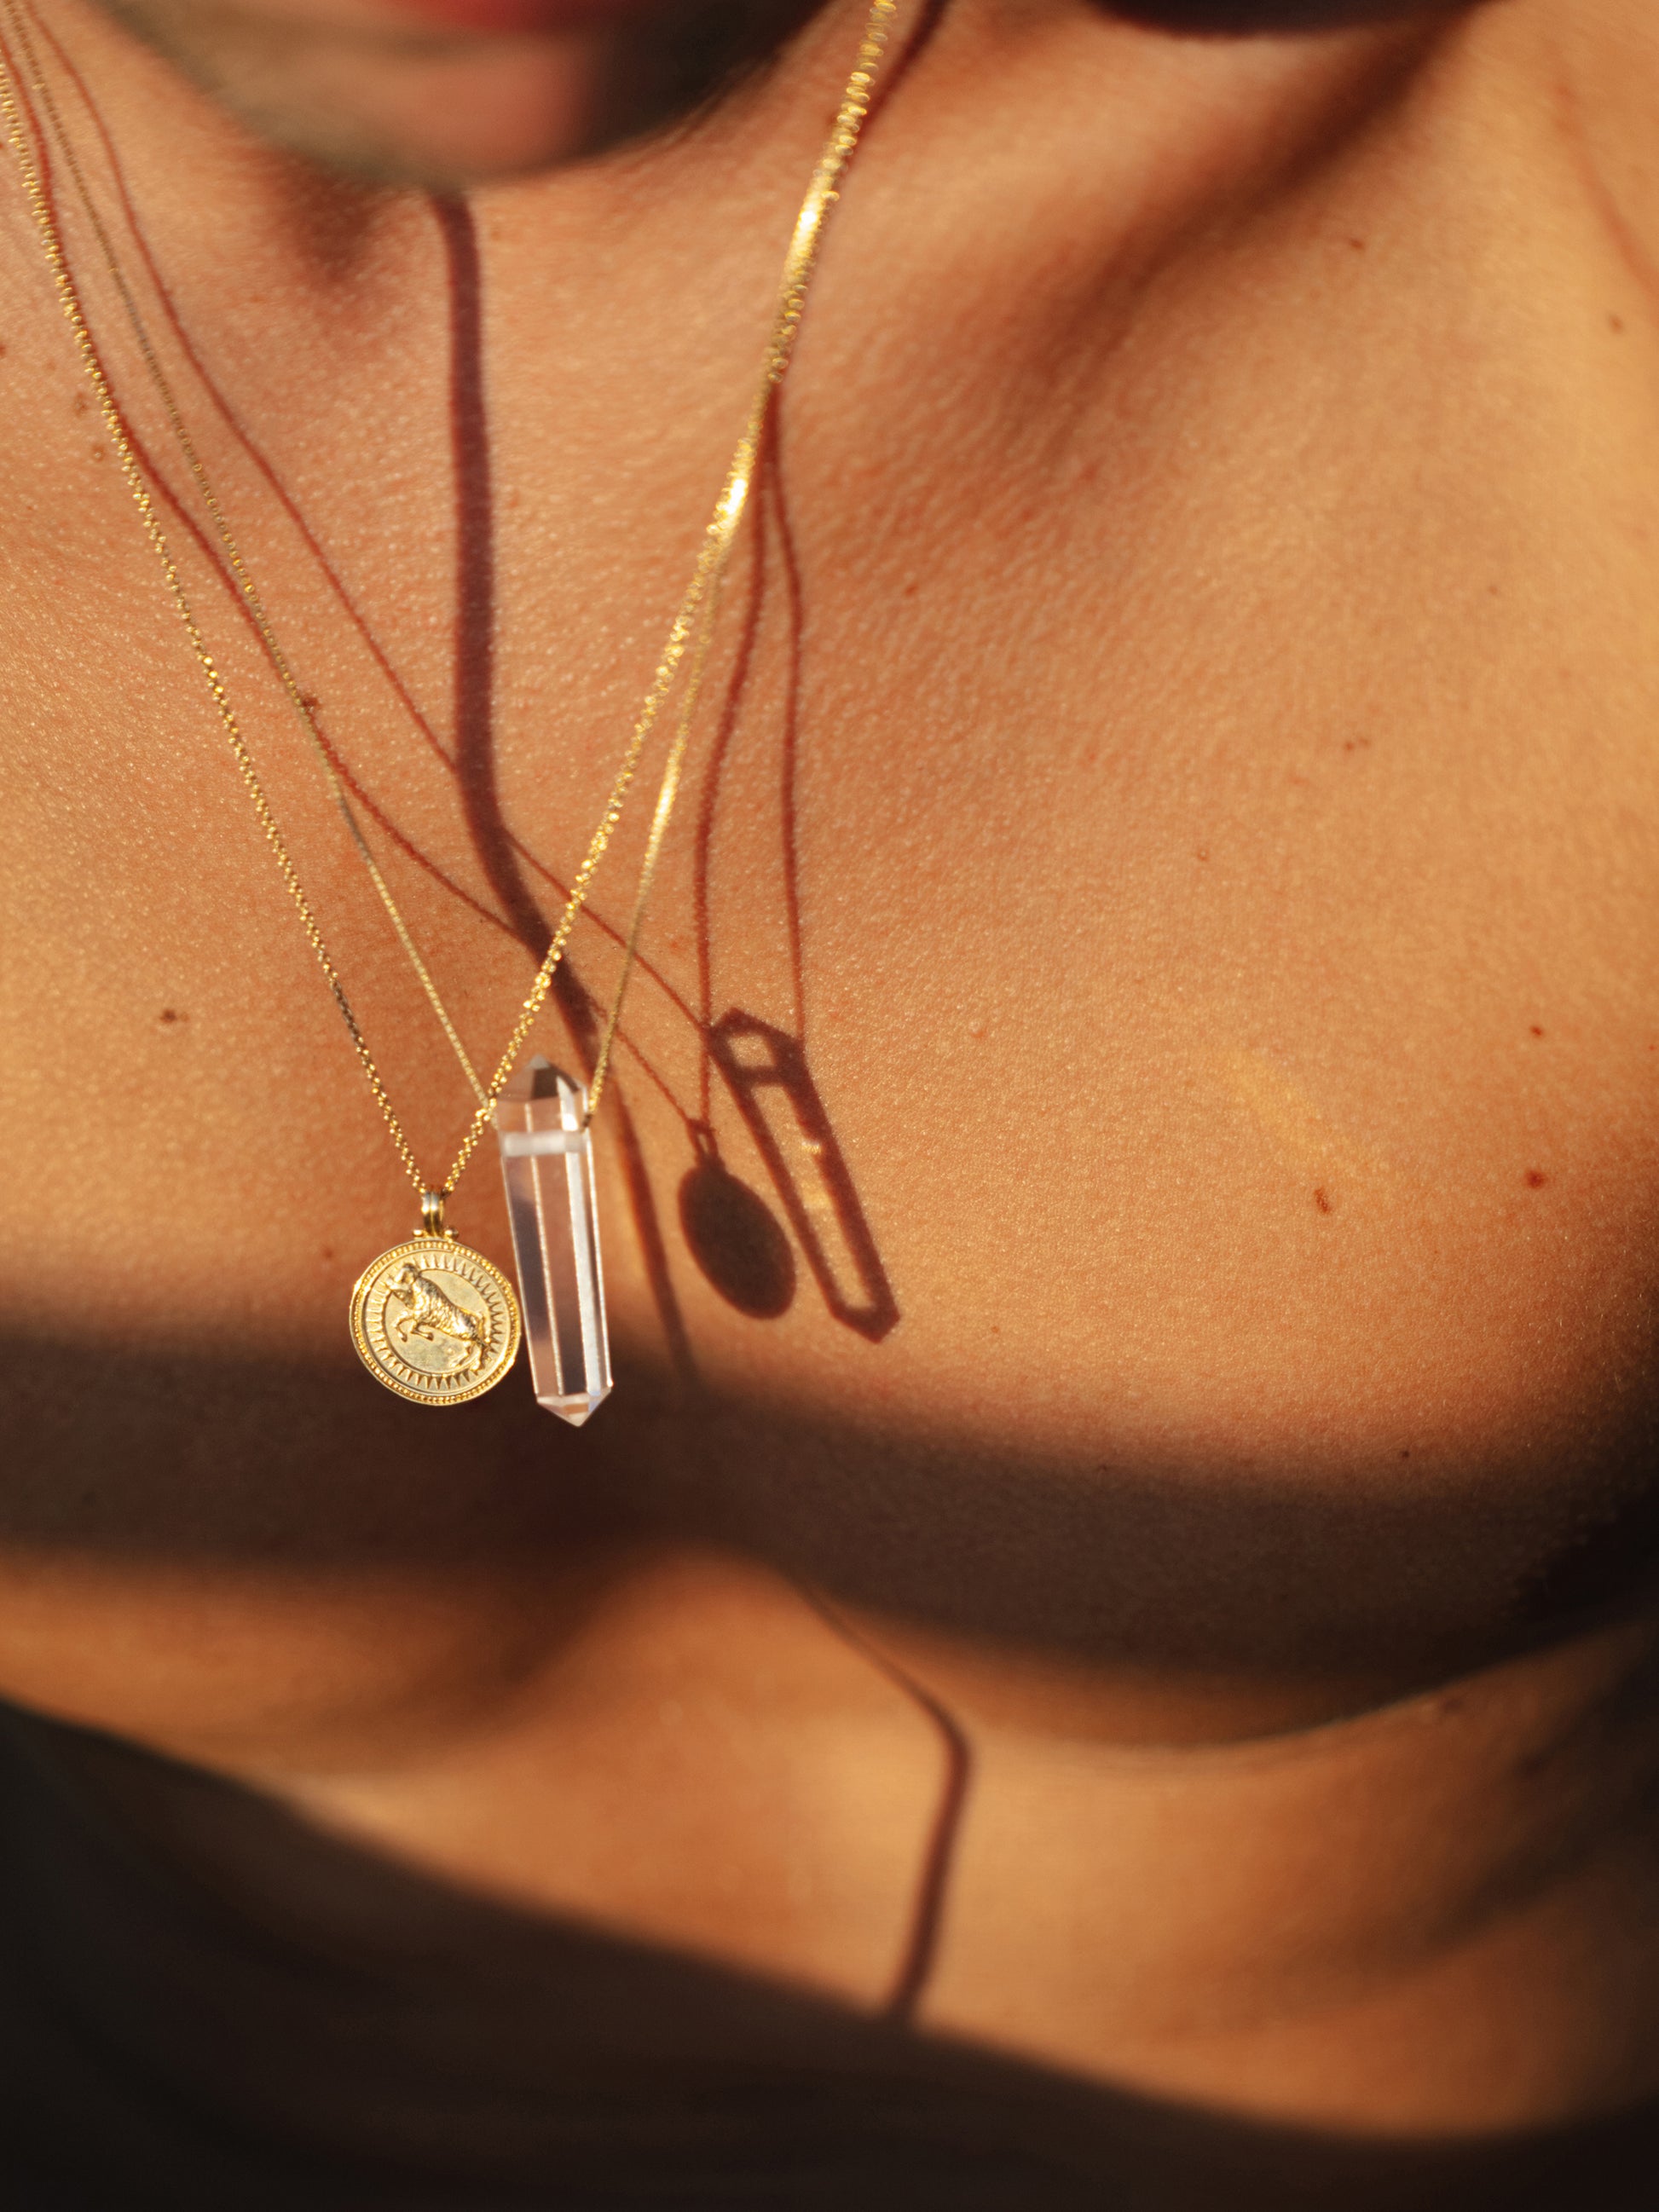 Aries. 18ct Solid Gold Star Sign Necklace. The pendant features an Evil Eye on the back to ward off any naughty behavior aimed at you, Our logo and the 750 Hallmark for 18ct Gold.